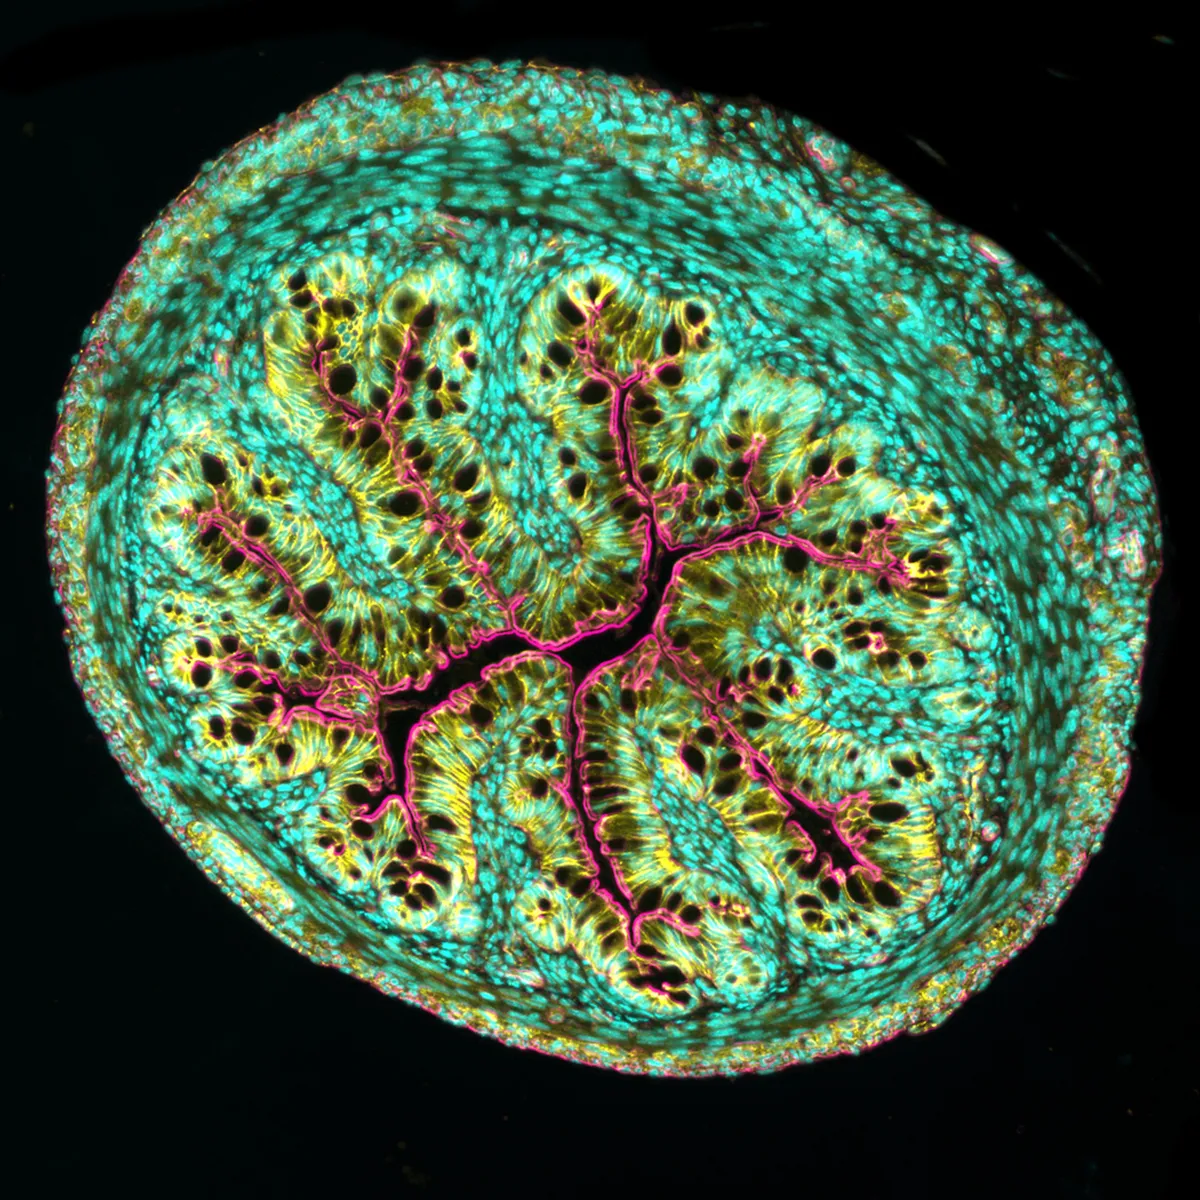 Cross section of mouse intestine, imaged using Fluorescence. Photo by Dr. Amy Engevik/Nikon Small World